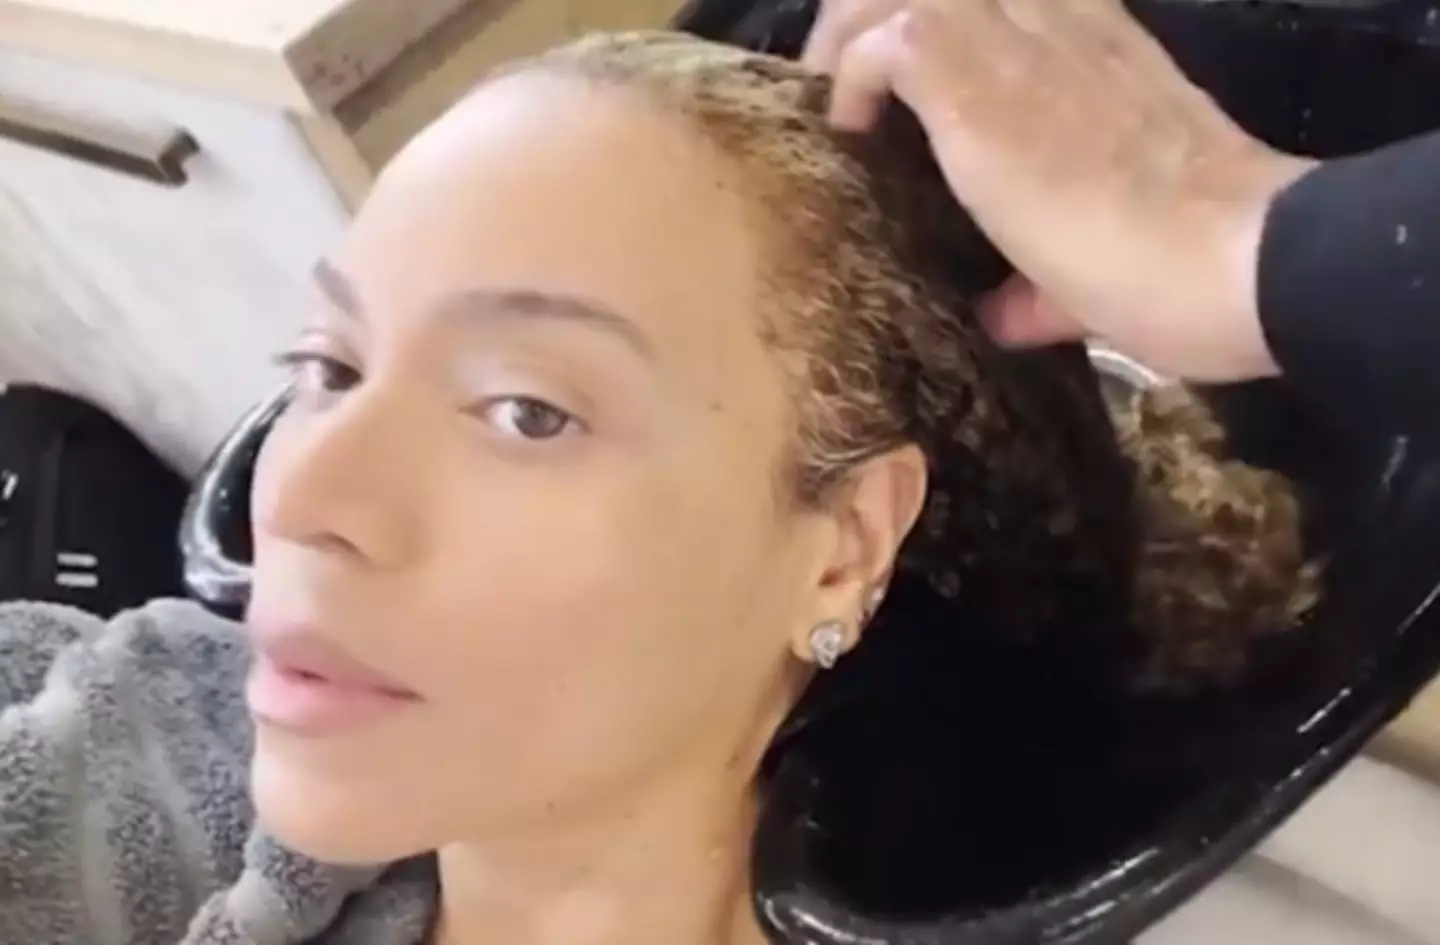 The 'Texas Hold 'Em' star promoted her line of haircare products in the Instagram tutorial. (Instagram/@beyonce)